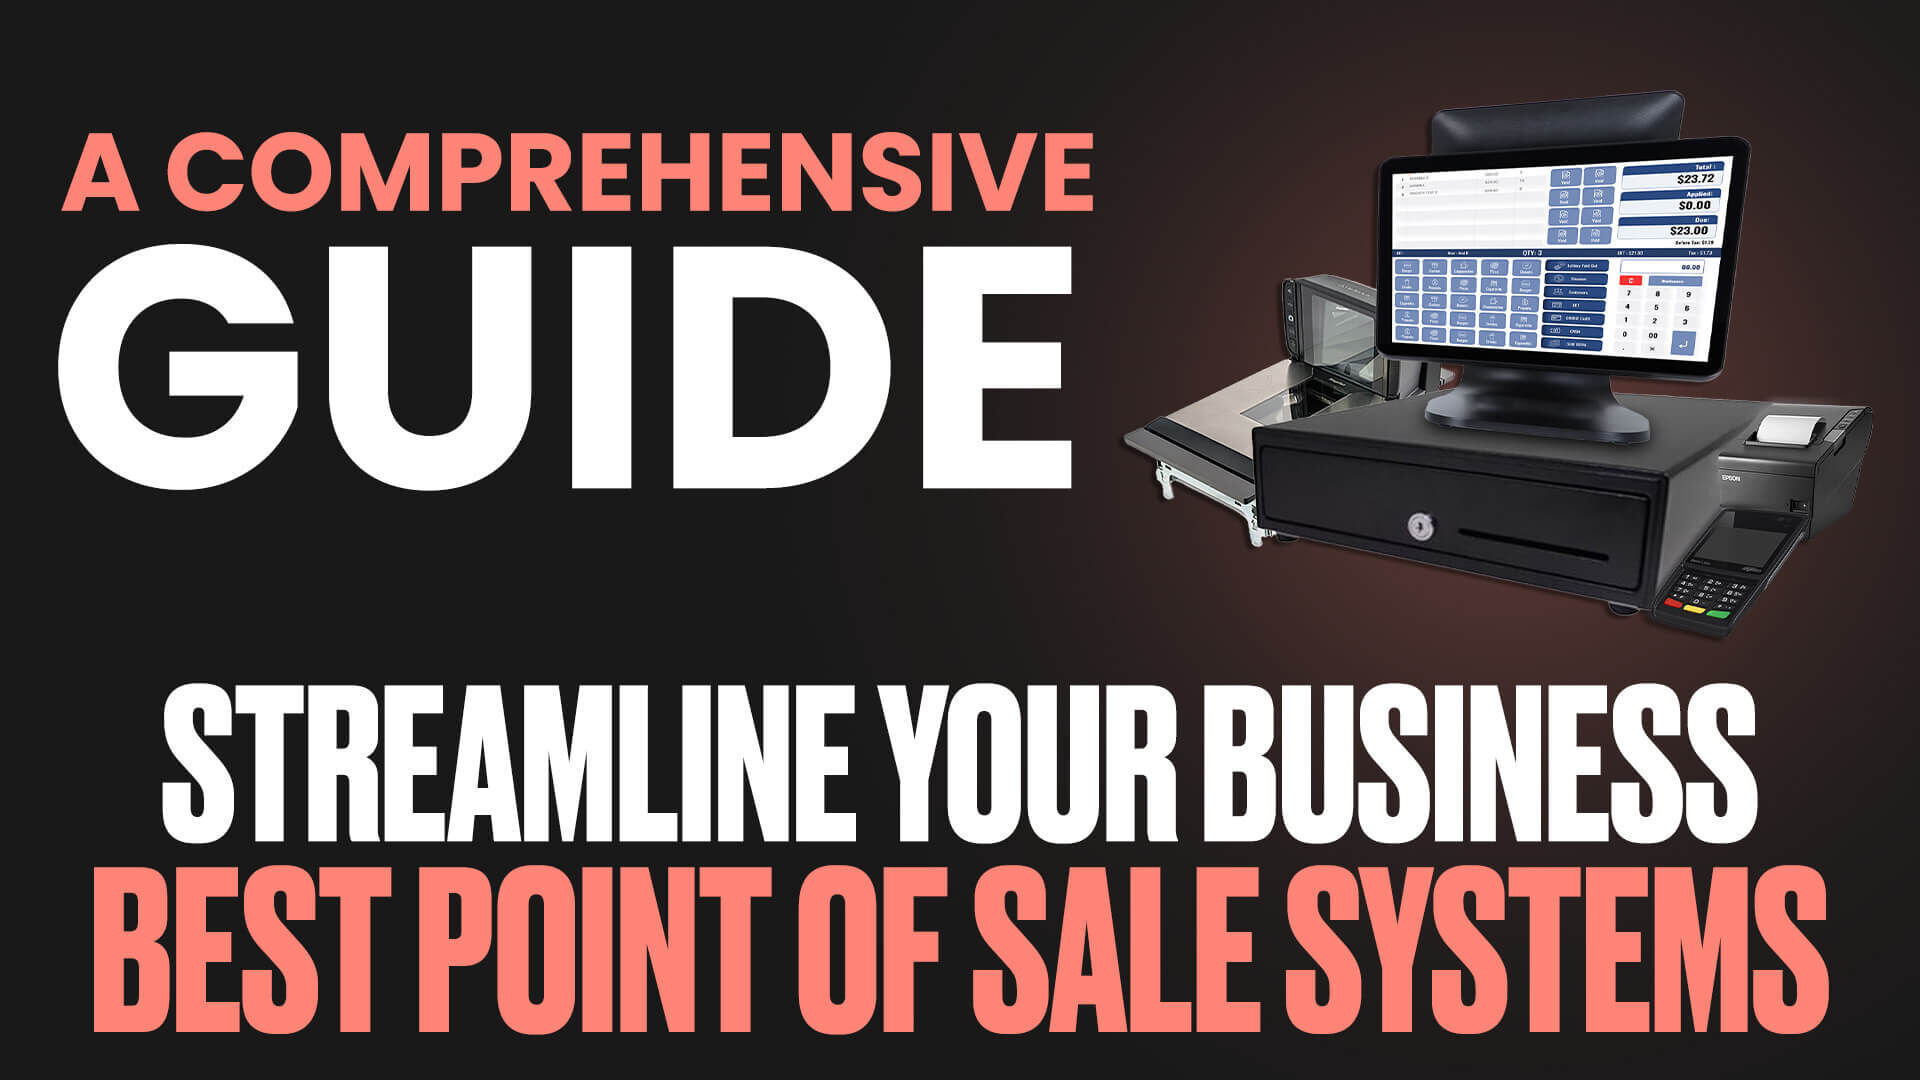 Streamline Your Business with the Best Point of Sale Systems